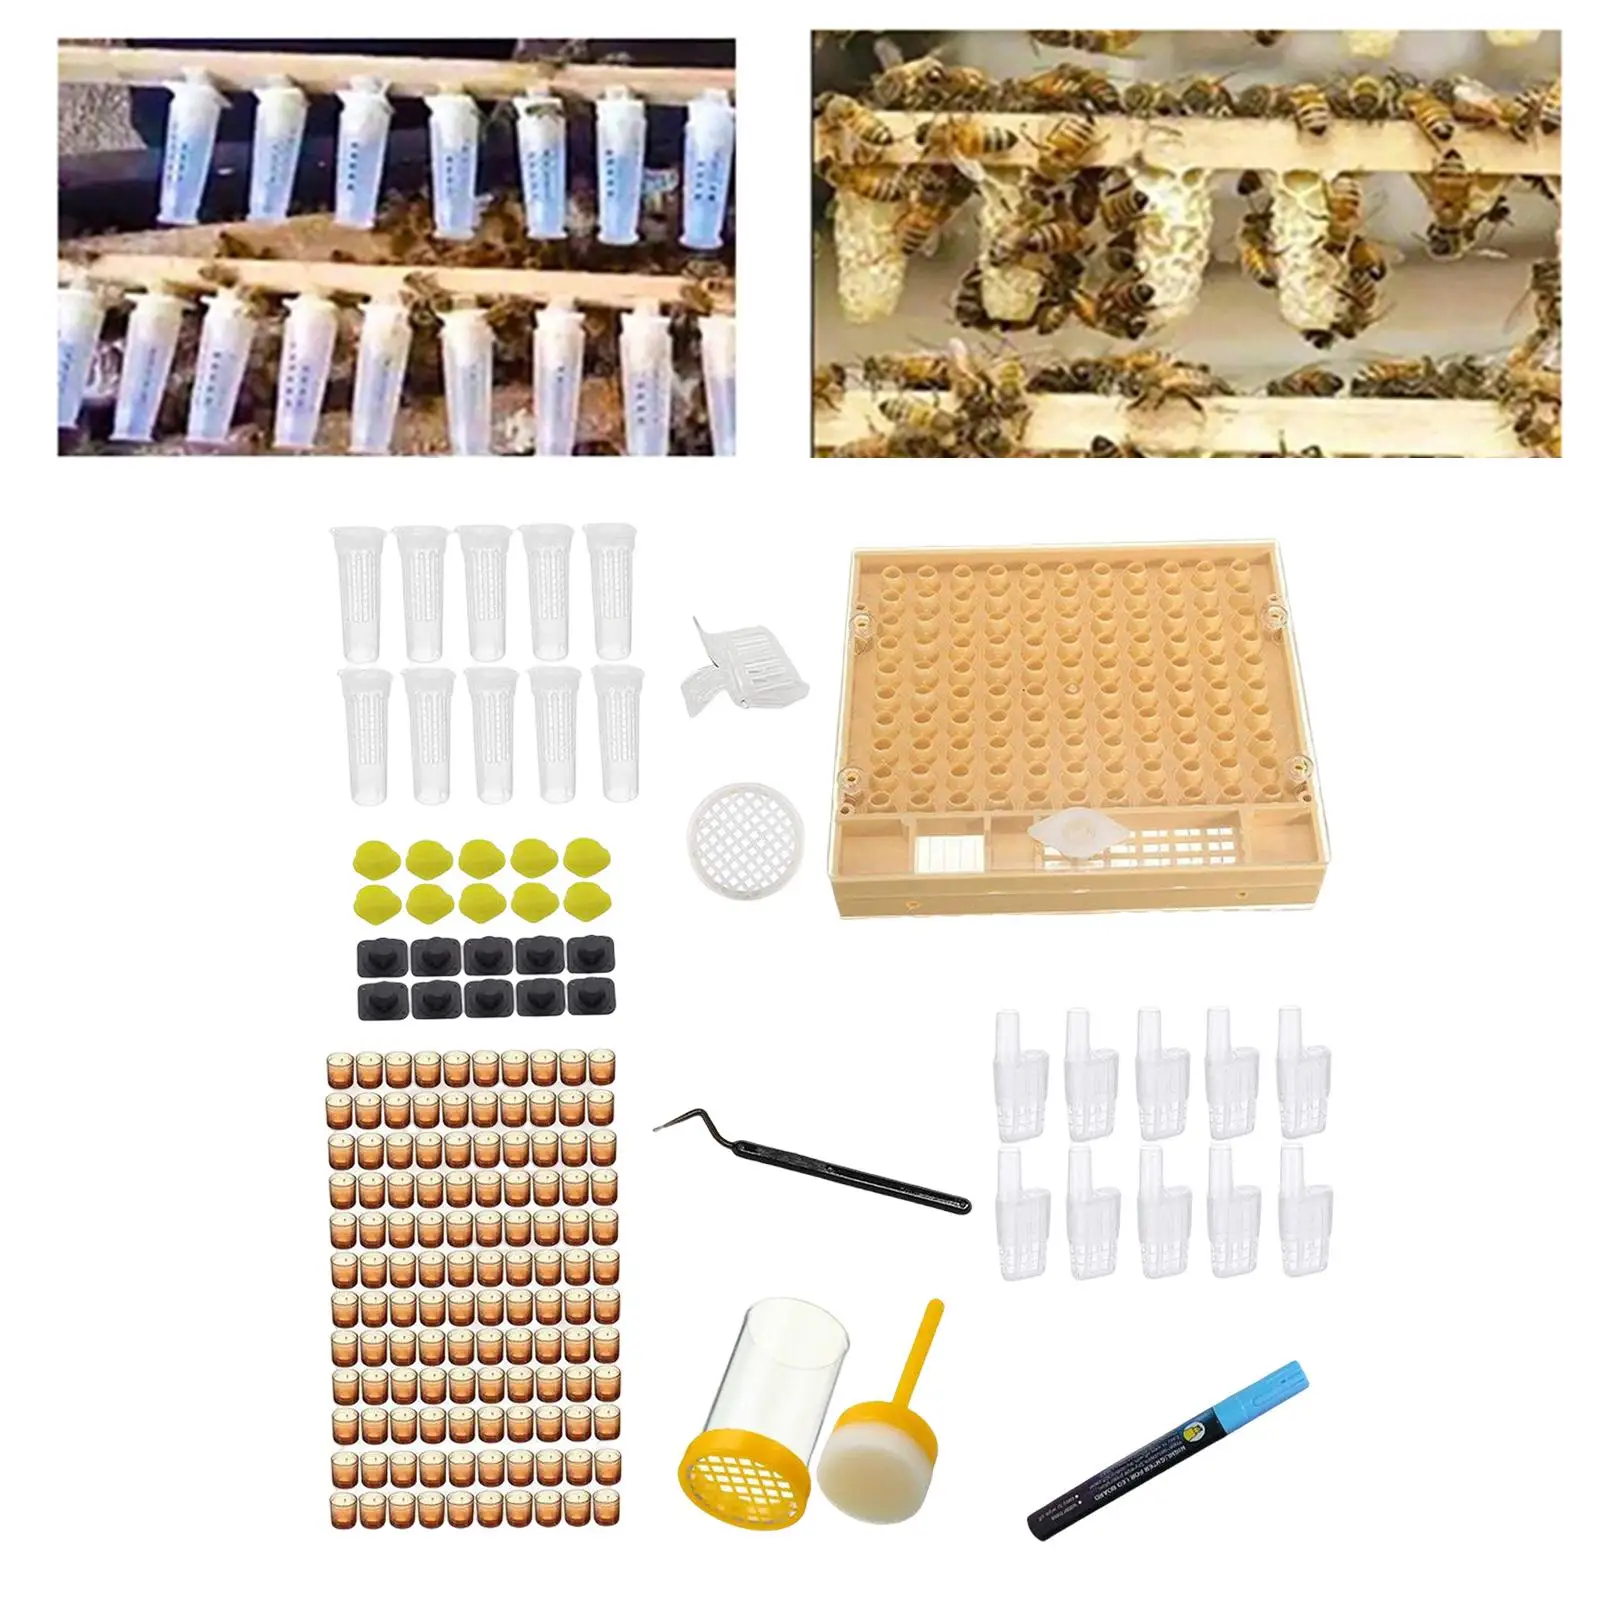 Complete Bee Queen Rearing Grafting Kit Convenient for Laying Eggs to Raise Queens Light Weight Catcher Cage Durable Bees Tools